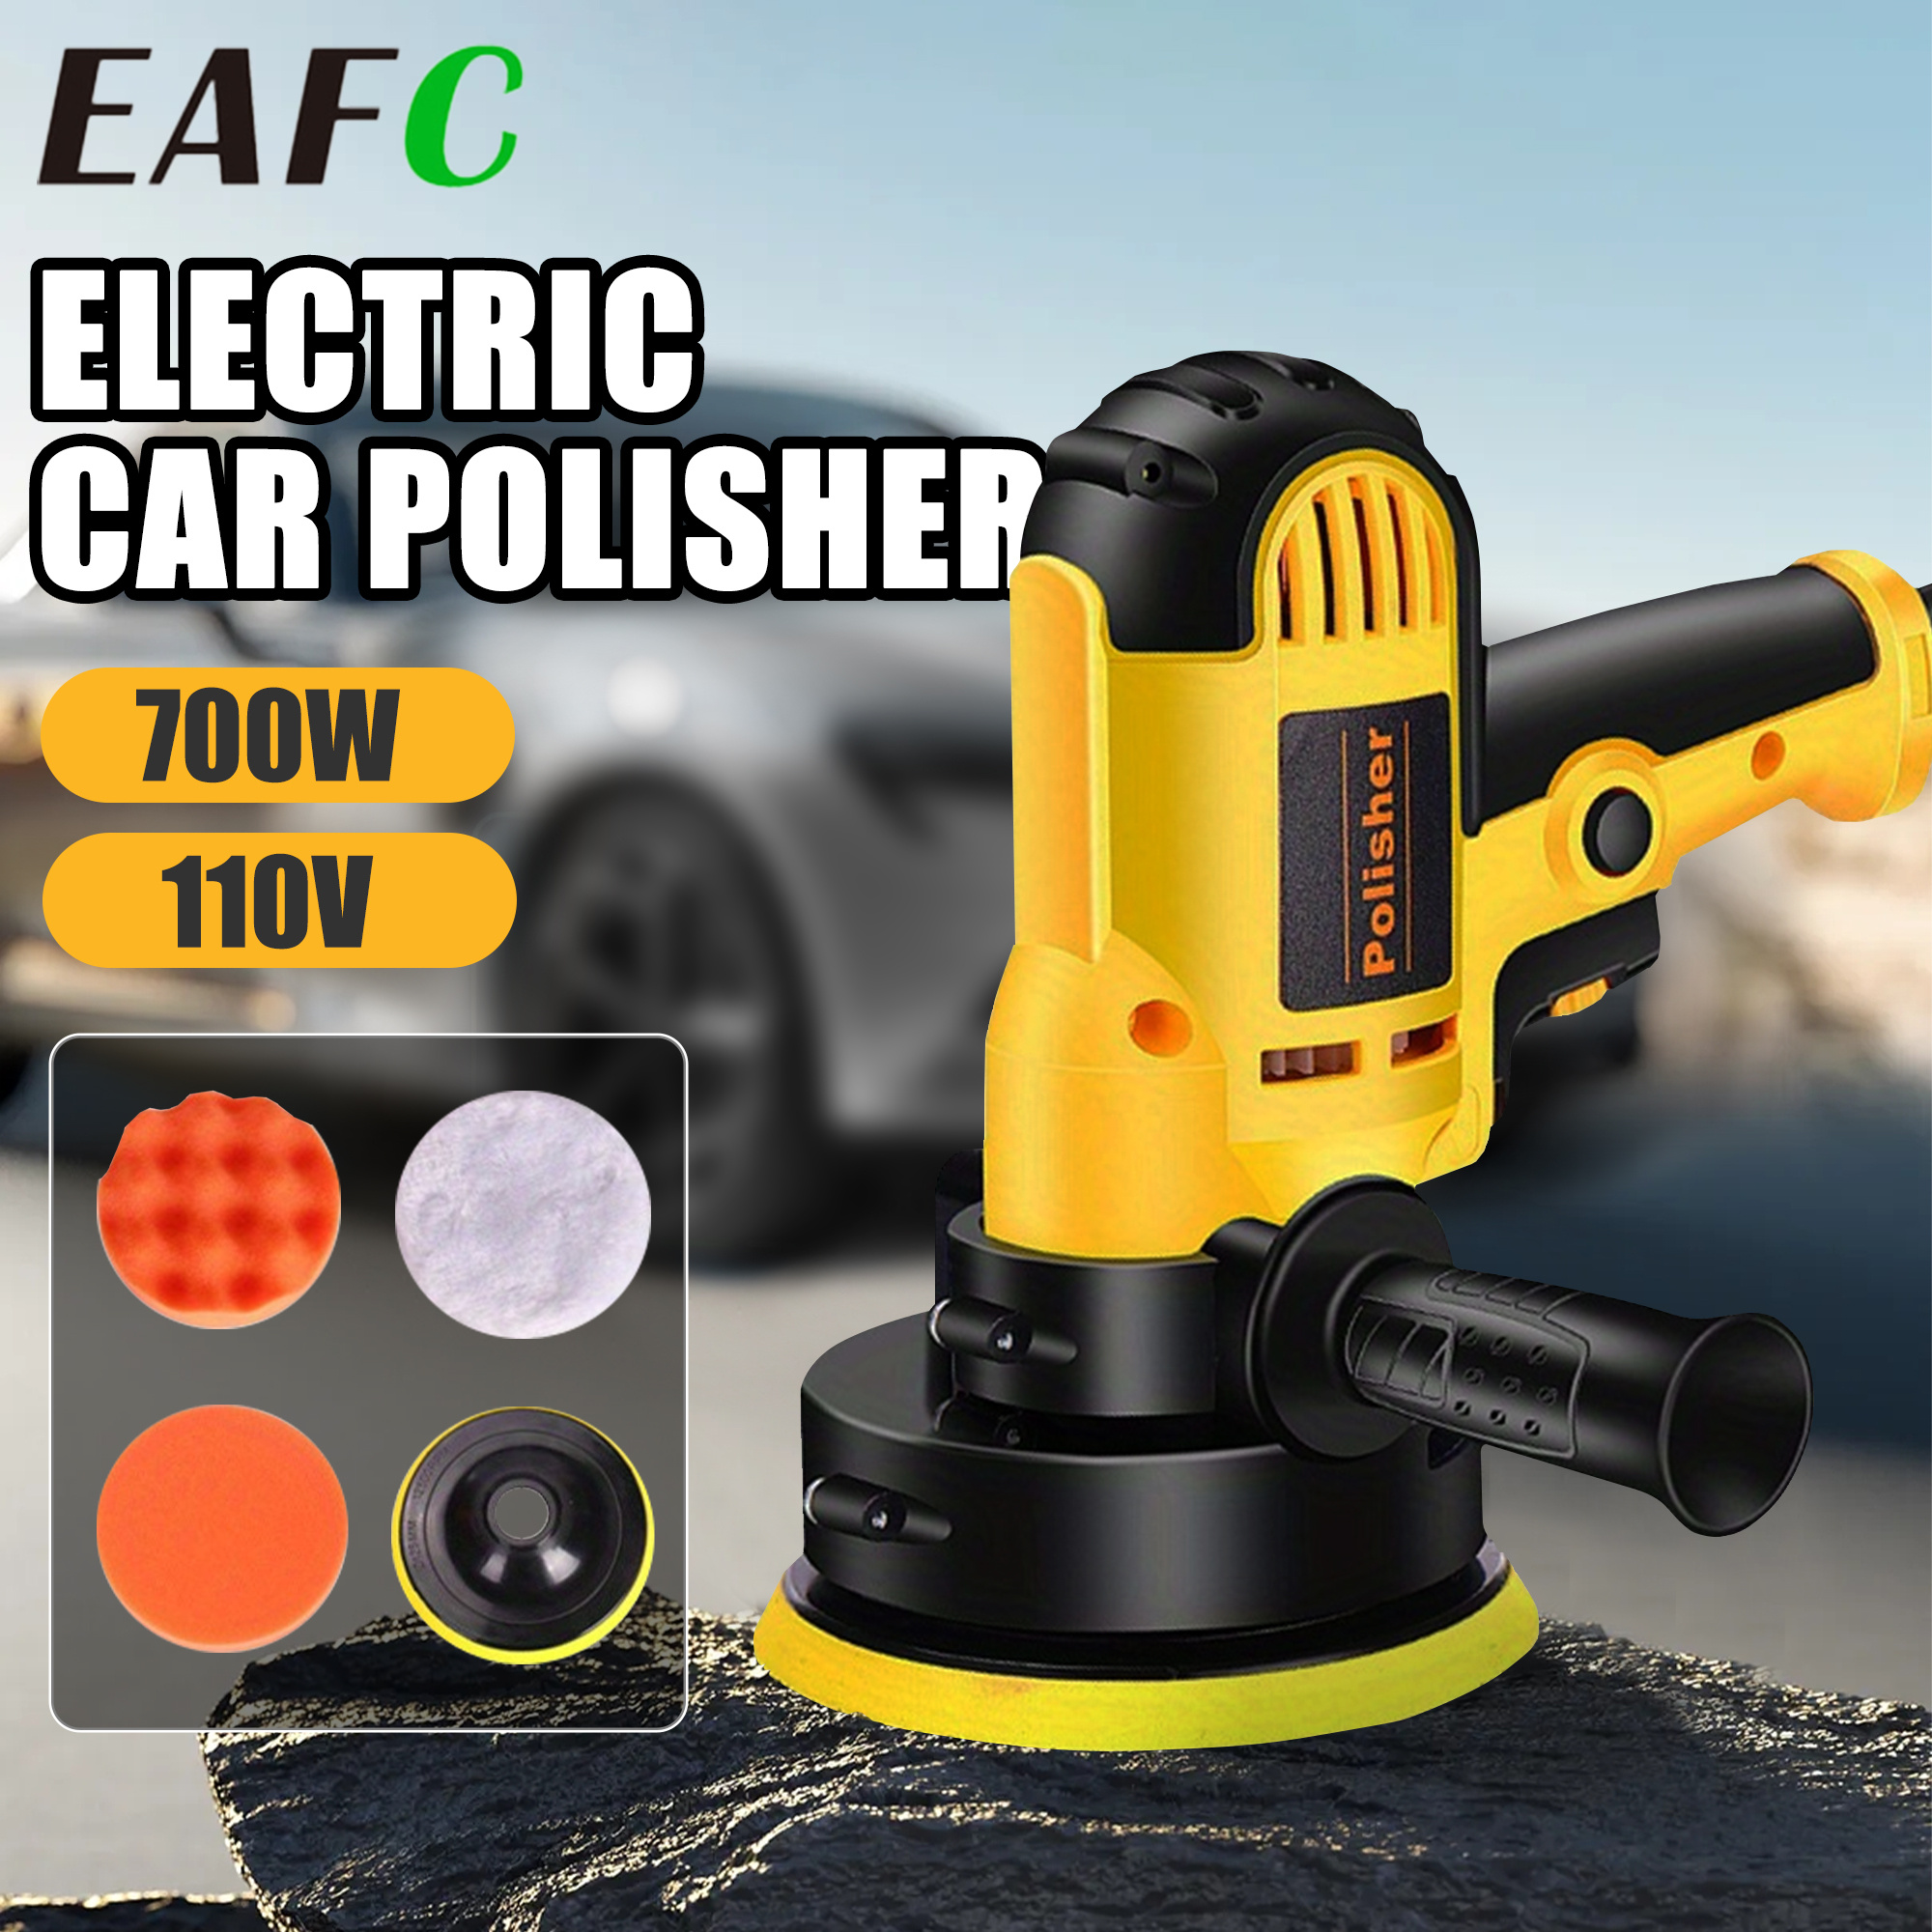 

Electric Car Polisher & Waxer, Us Plug 700w 125mm Base Variable Speed, Professional Polisher Perfect For Grinding, Polishing, Waxing Car Furniture